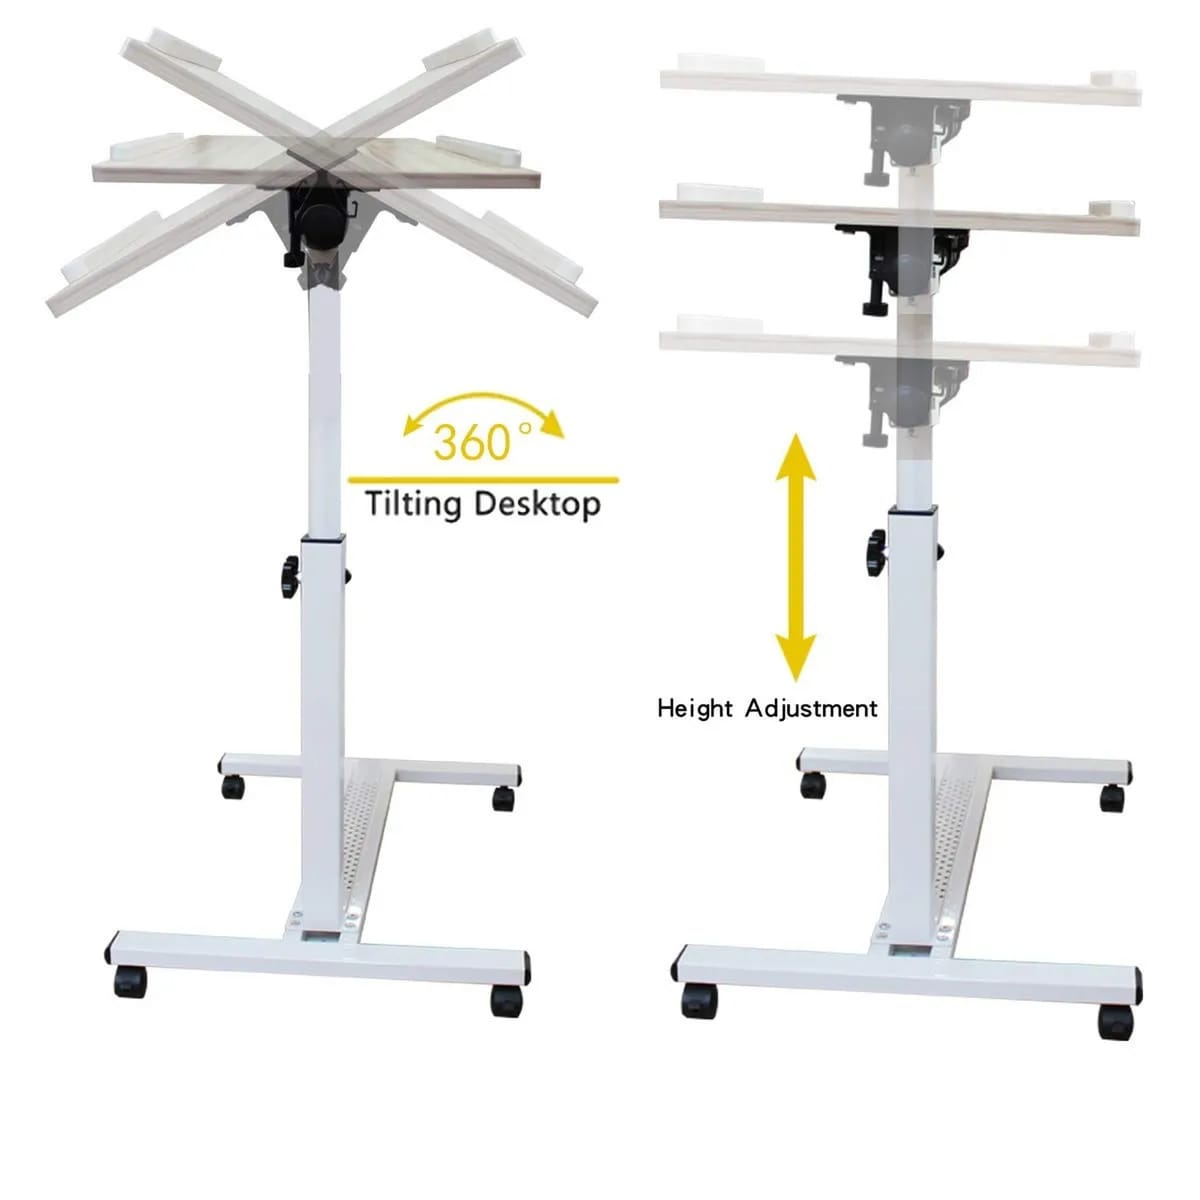 Adjustable Overbed Laptop Stand Table with a tilting desktop of 360 degrees and height adjustment feature